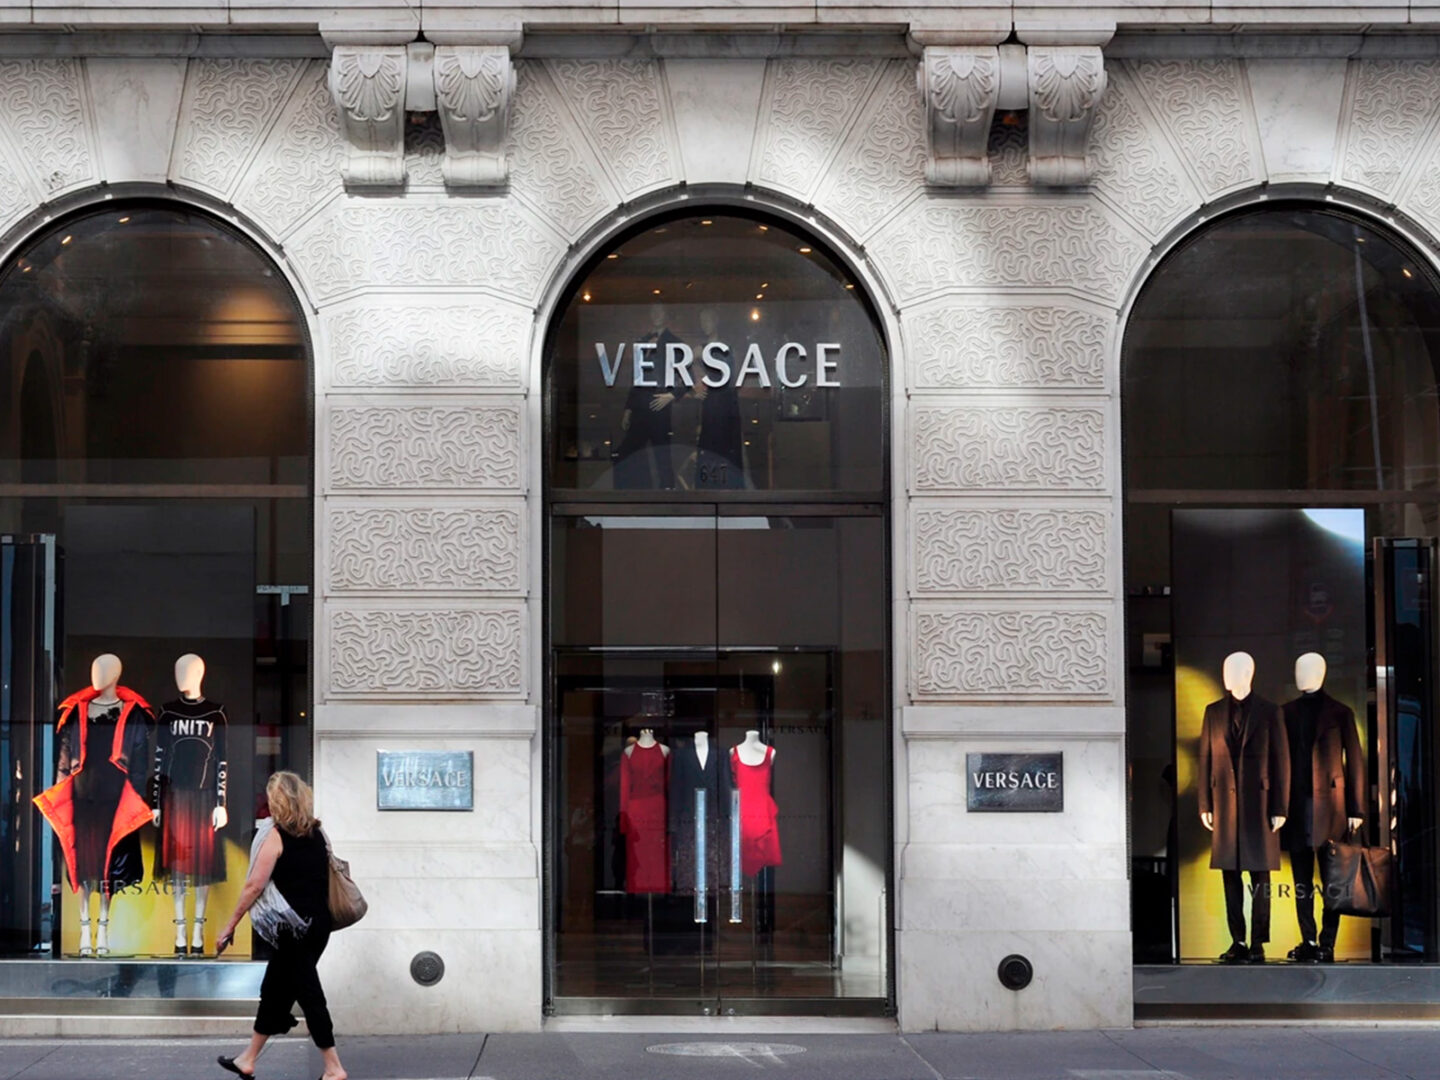 Tapestry buys Versace, Jimmy Choo and Michael Kors in $8.5 billion deal